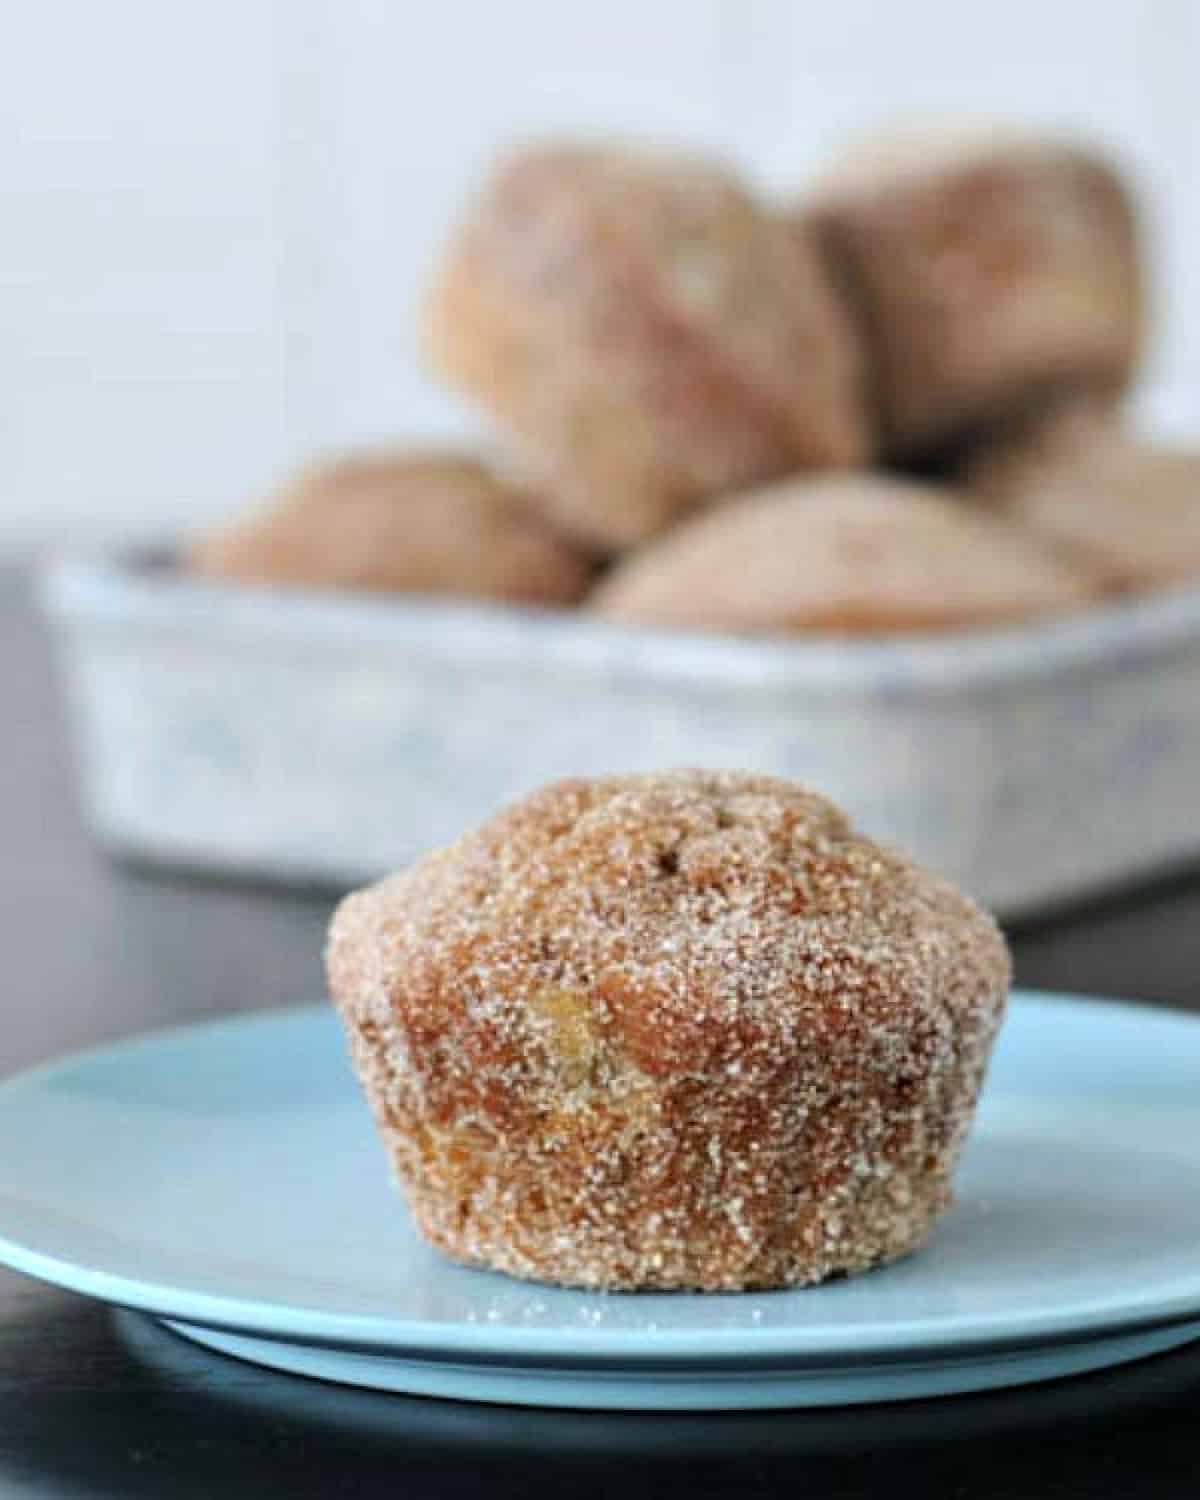 One sugar coated "donut muffin" on a light blue plate, with more muffins in a shallow walled dish blurred in background.